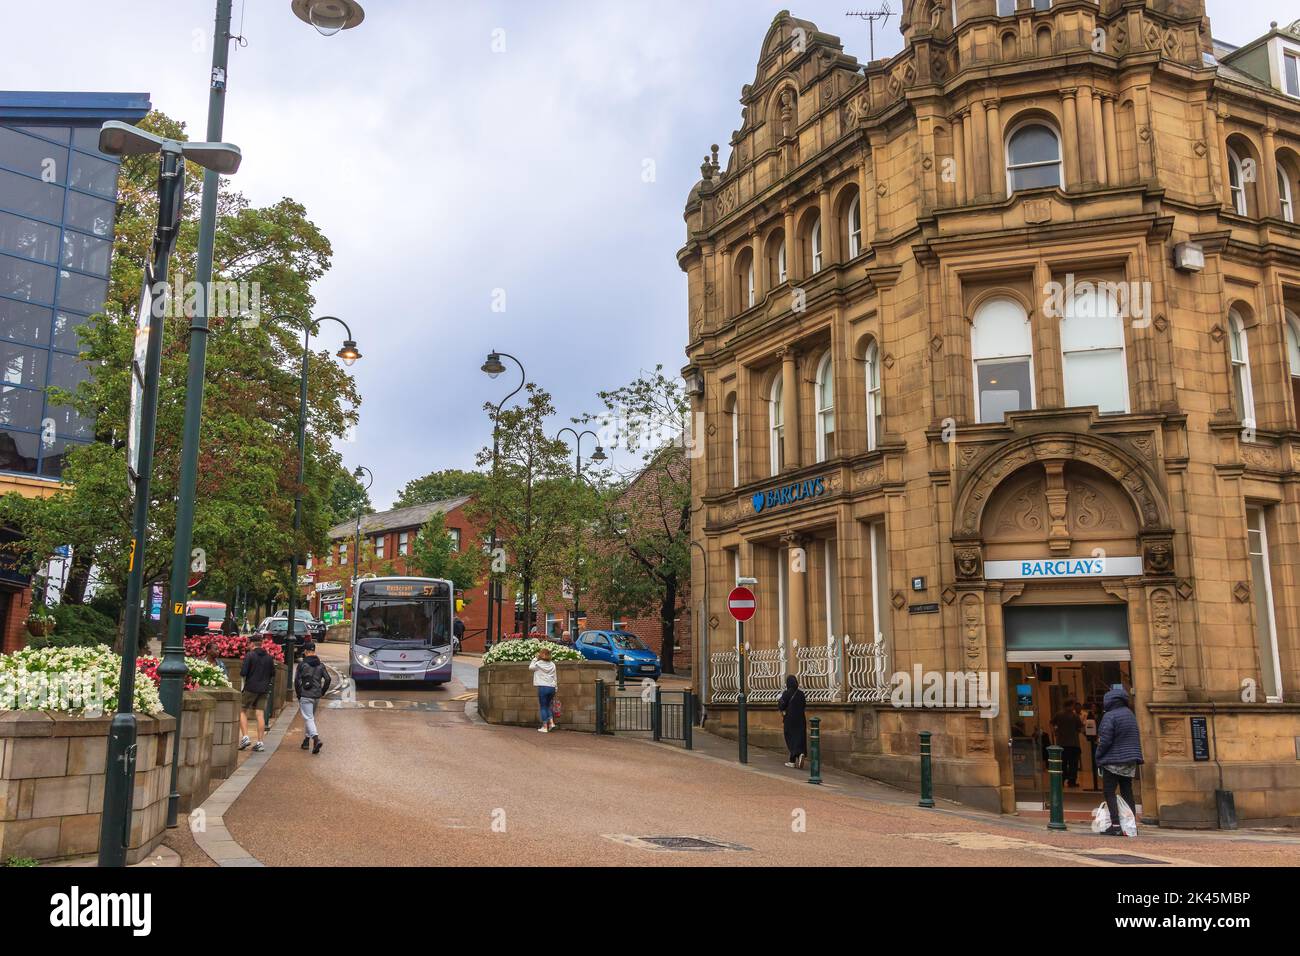 Street scene in historic town of Oldham, UK, known in the past as the biggest cotton-spinning town in the world. Stock Photo